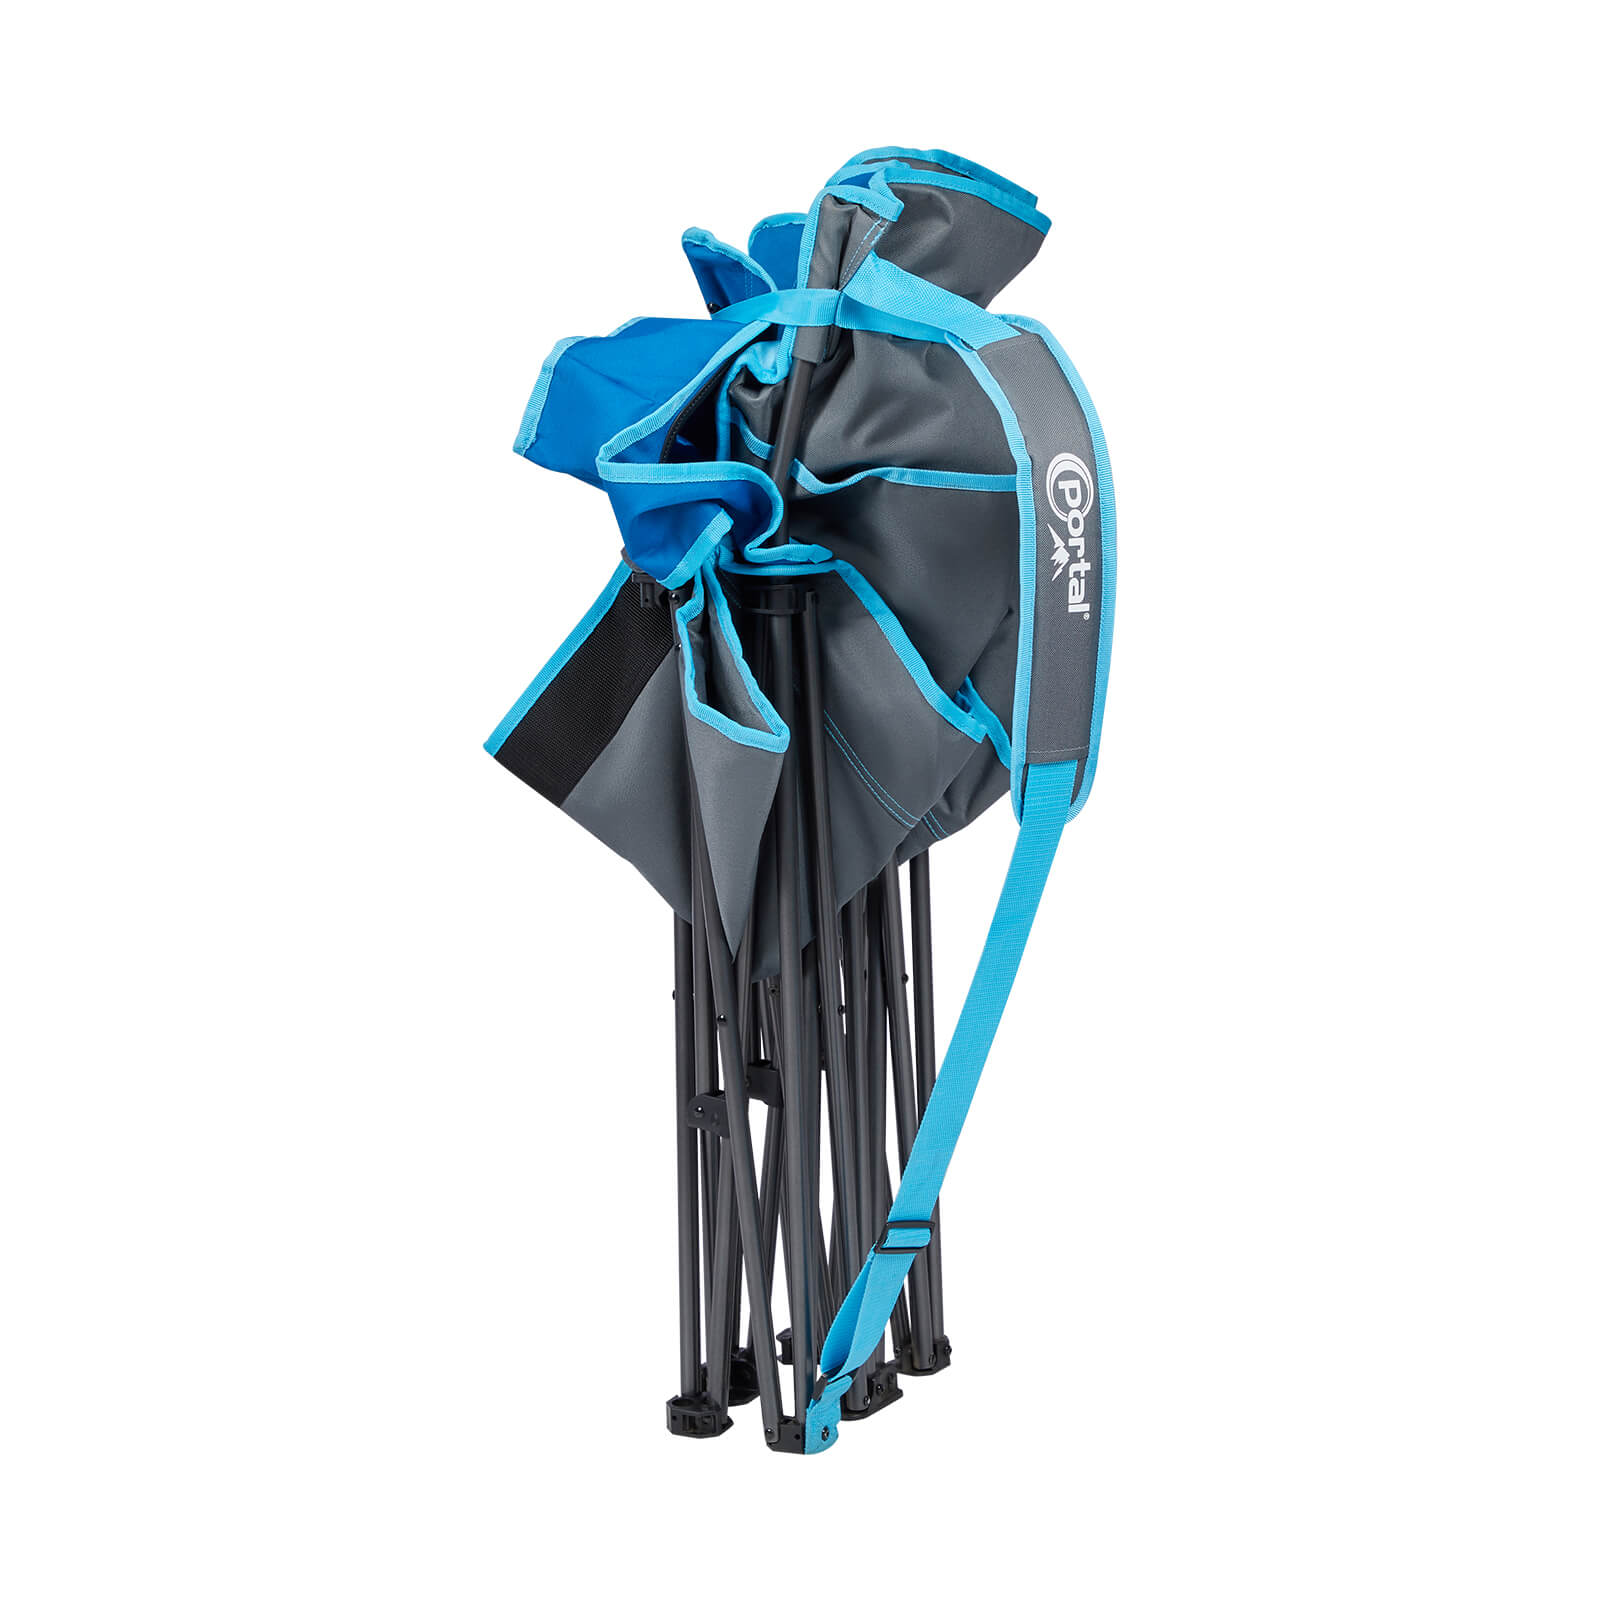 Portal Double Camp Chair